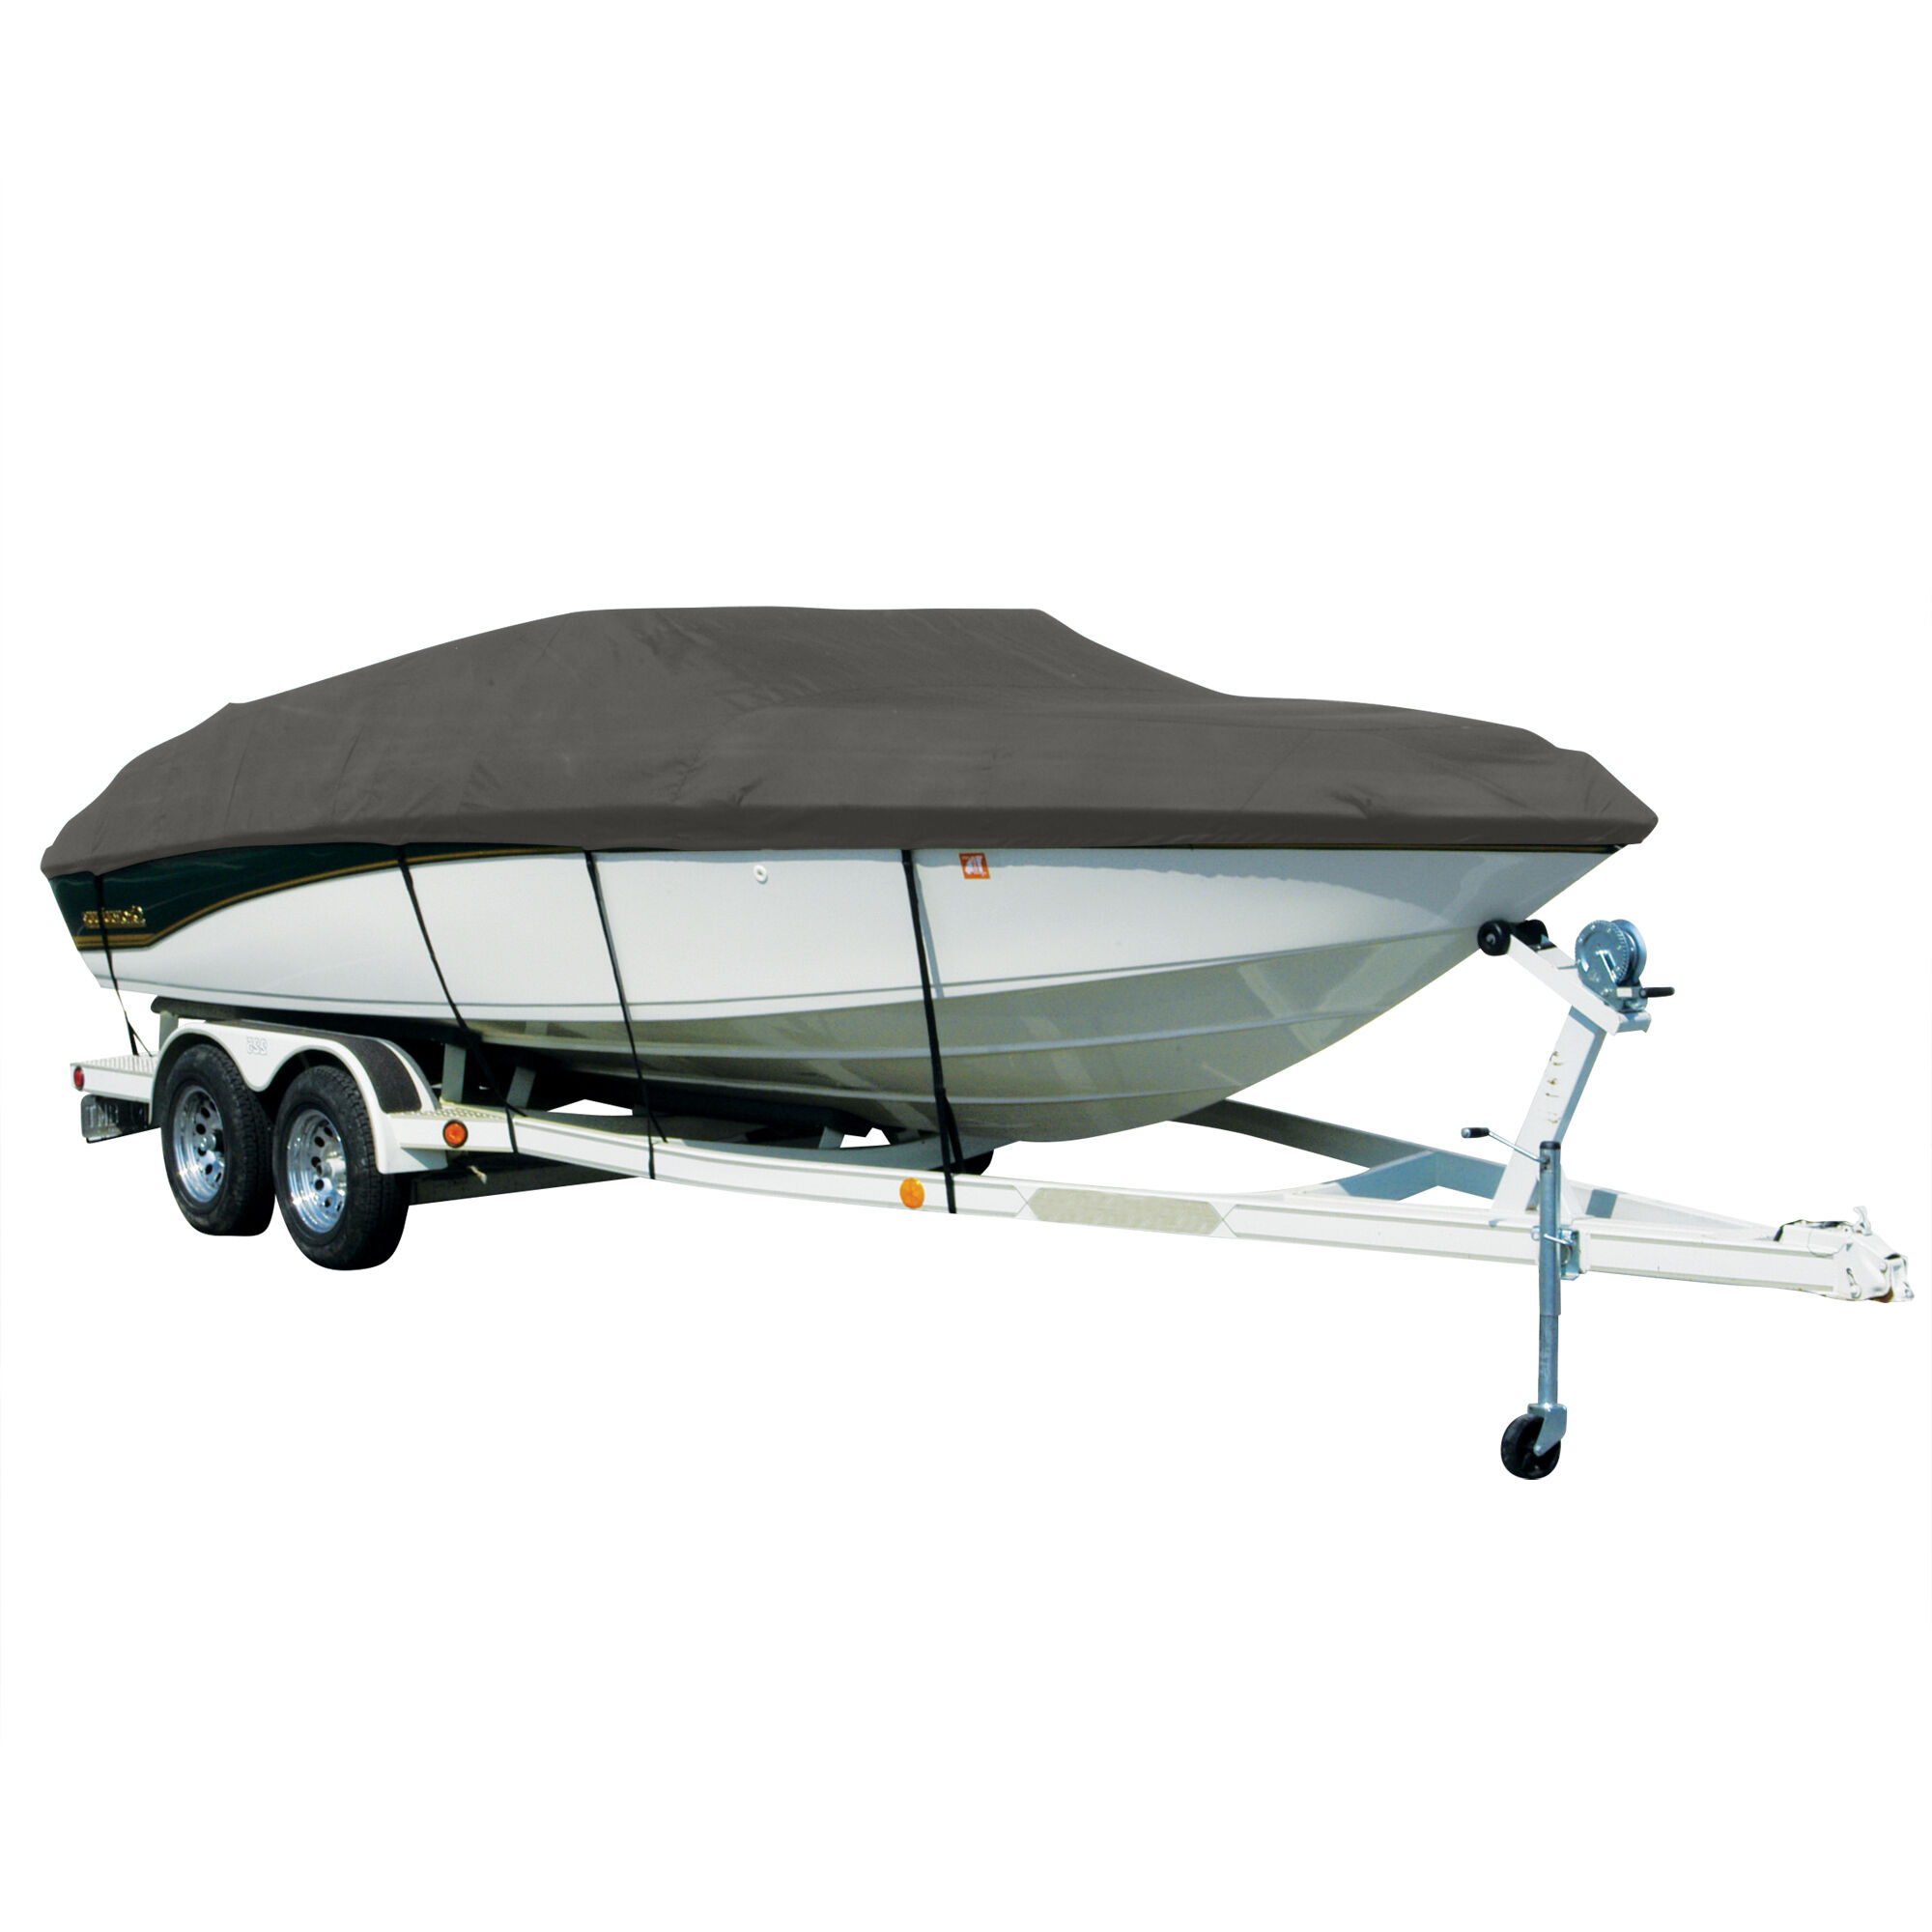 Covermate Sharkskin Plus Exact-Fit Cover for Tige 2000 Slm Comp 2000 Slm Comp Does Not Cover Swim Platform. Charcoal Boat Cover Polyester